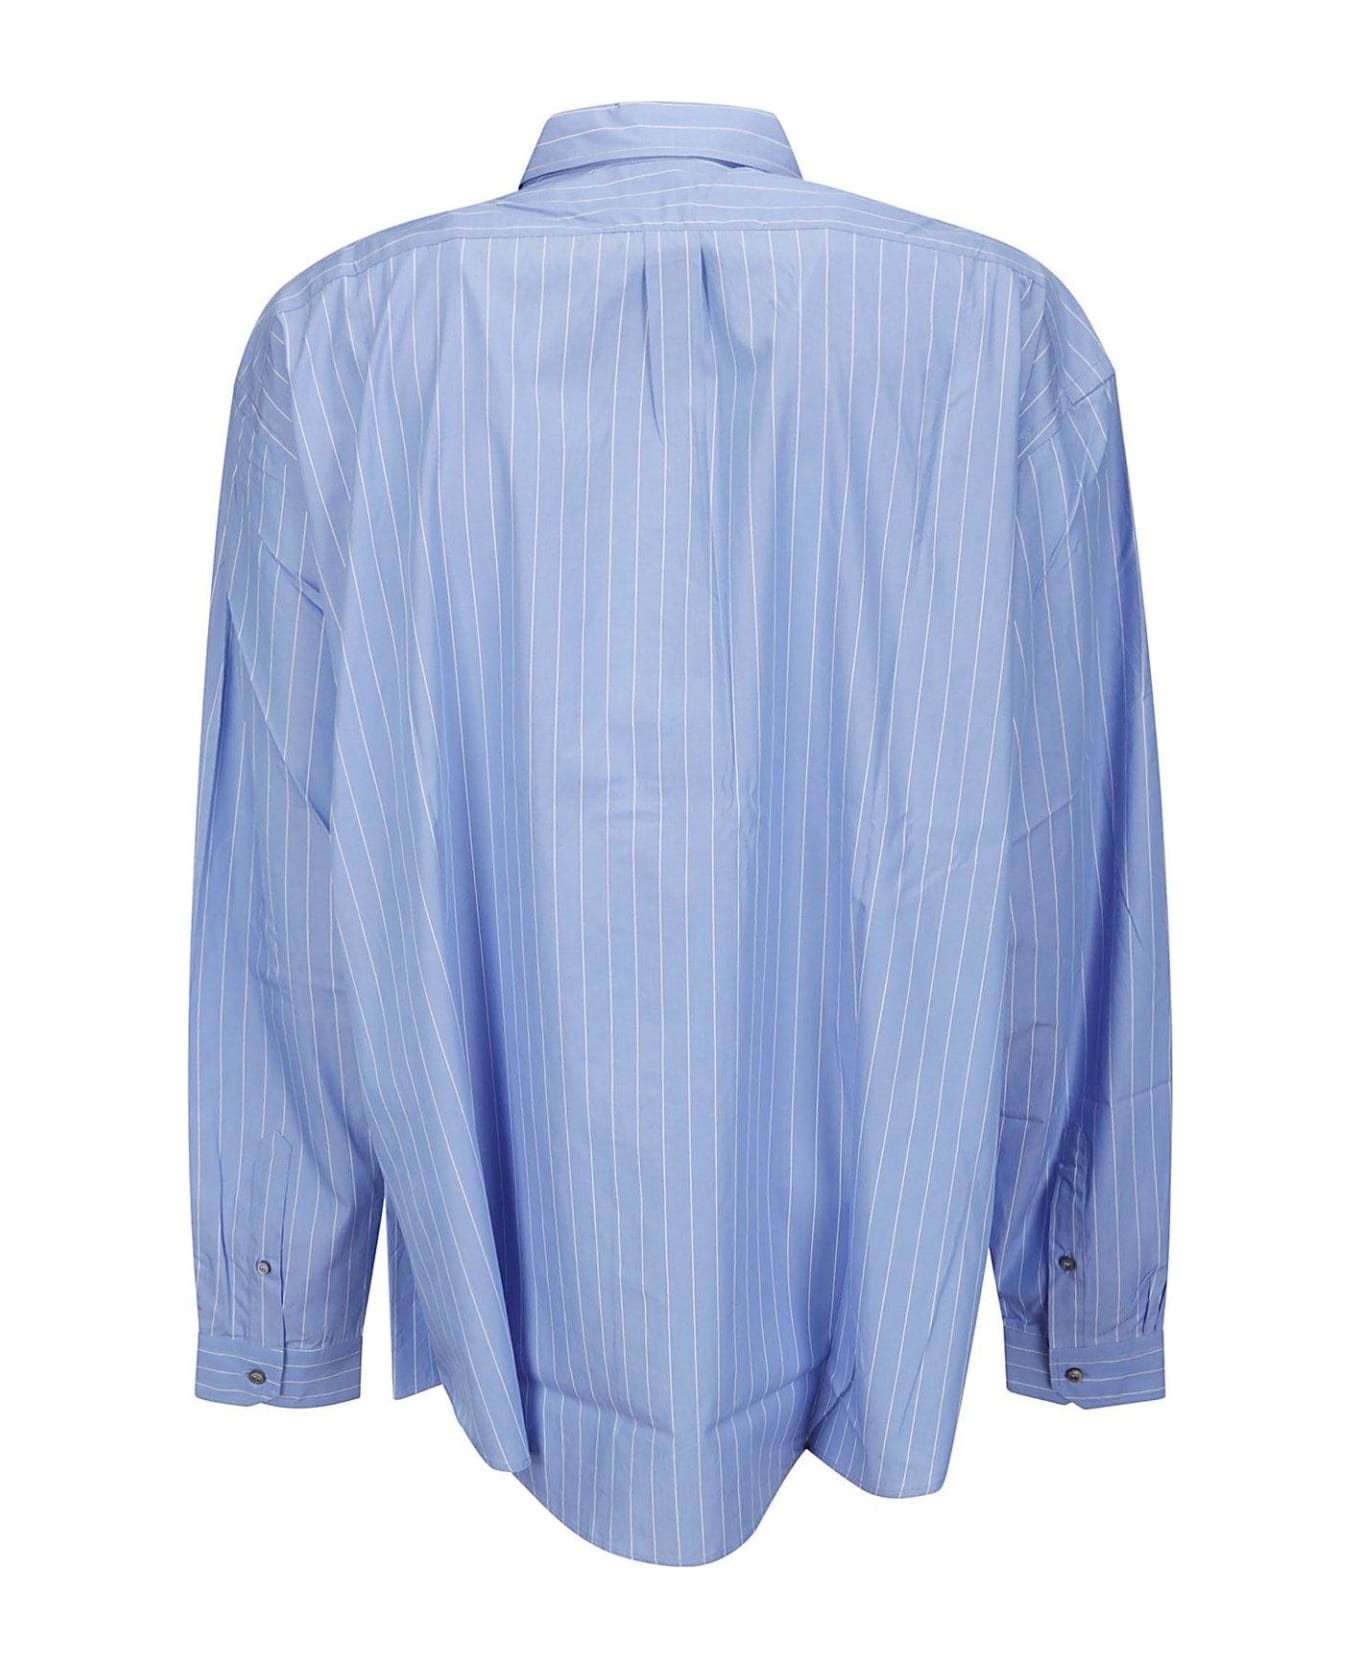 Y/Project Striped Buttoned Shirt - BLUE